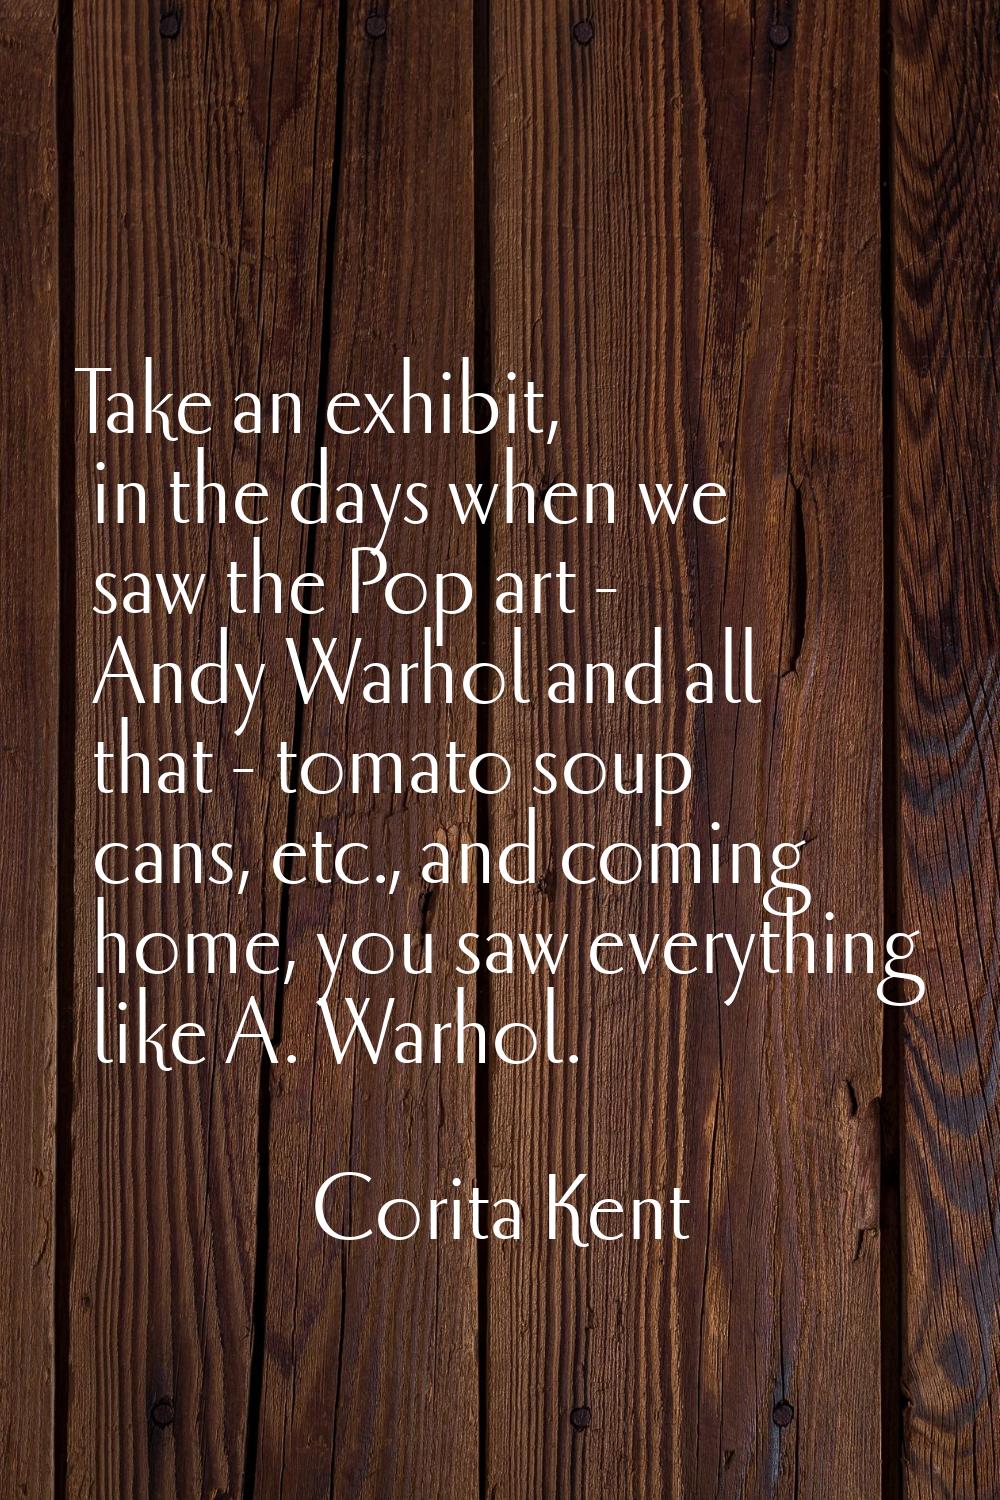 Take an exhibit, in the days when we saw the Pop art - Andy Warhol and all that - tomato soup cans,